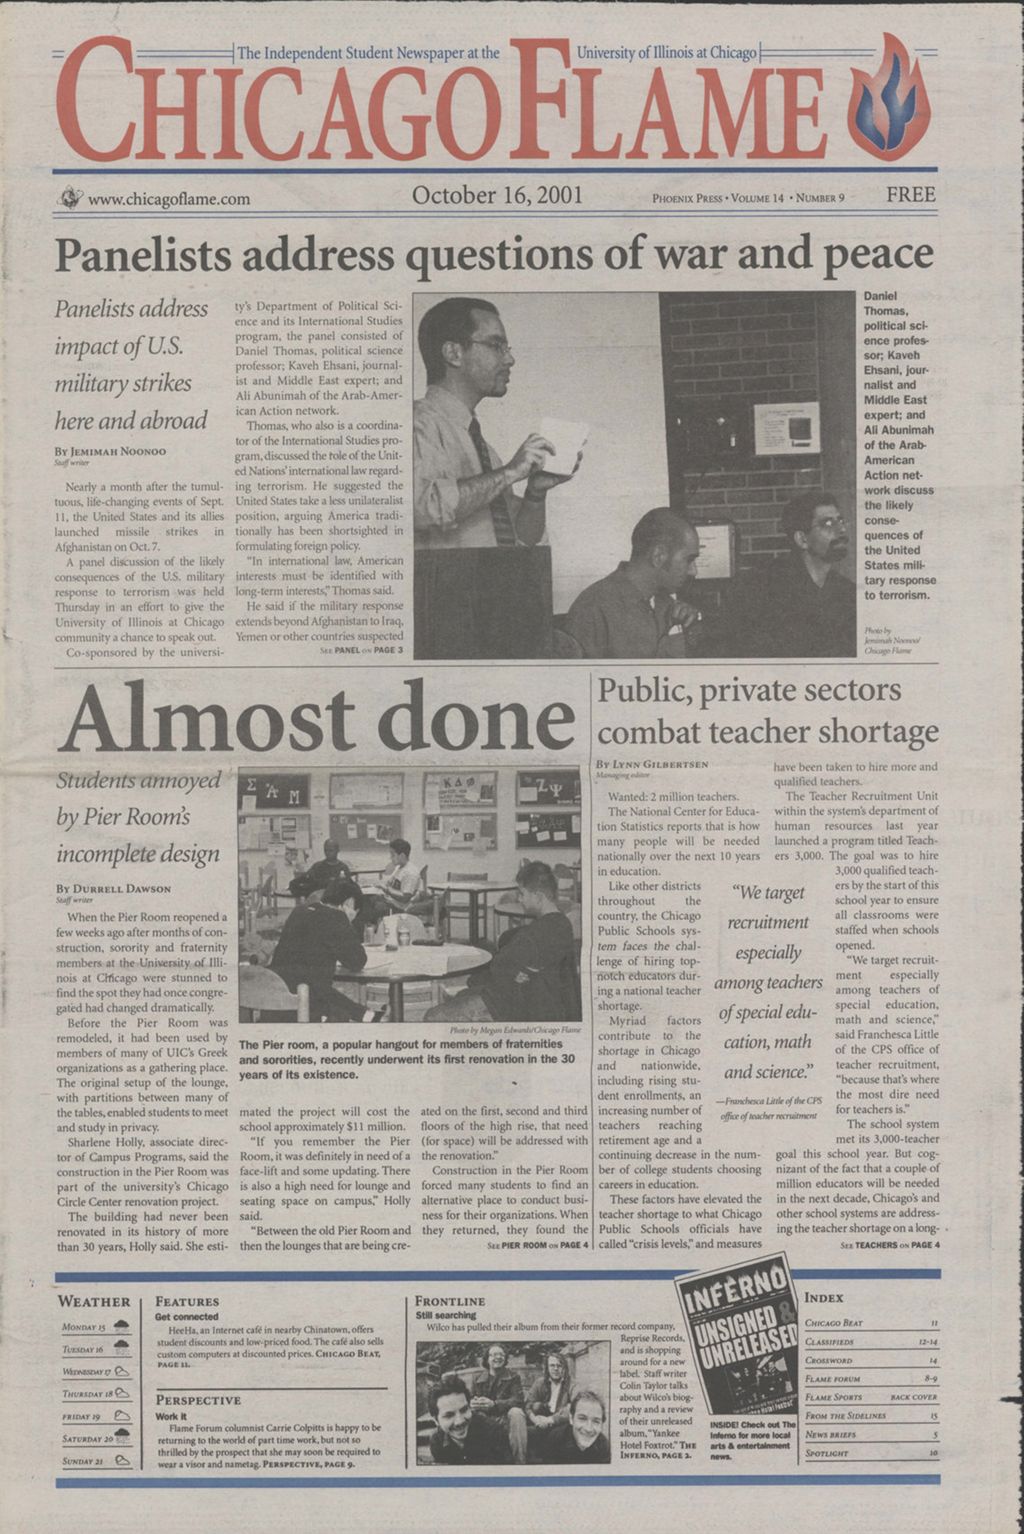 Chicago Flame (October 16, 2001)